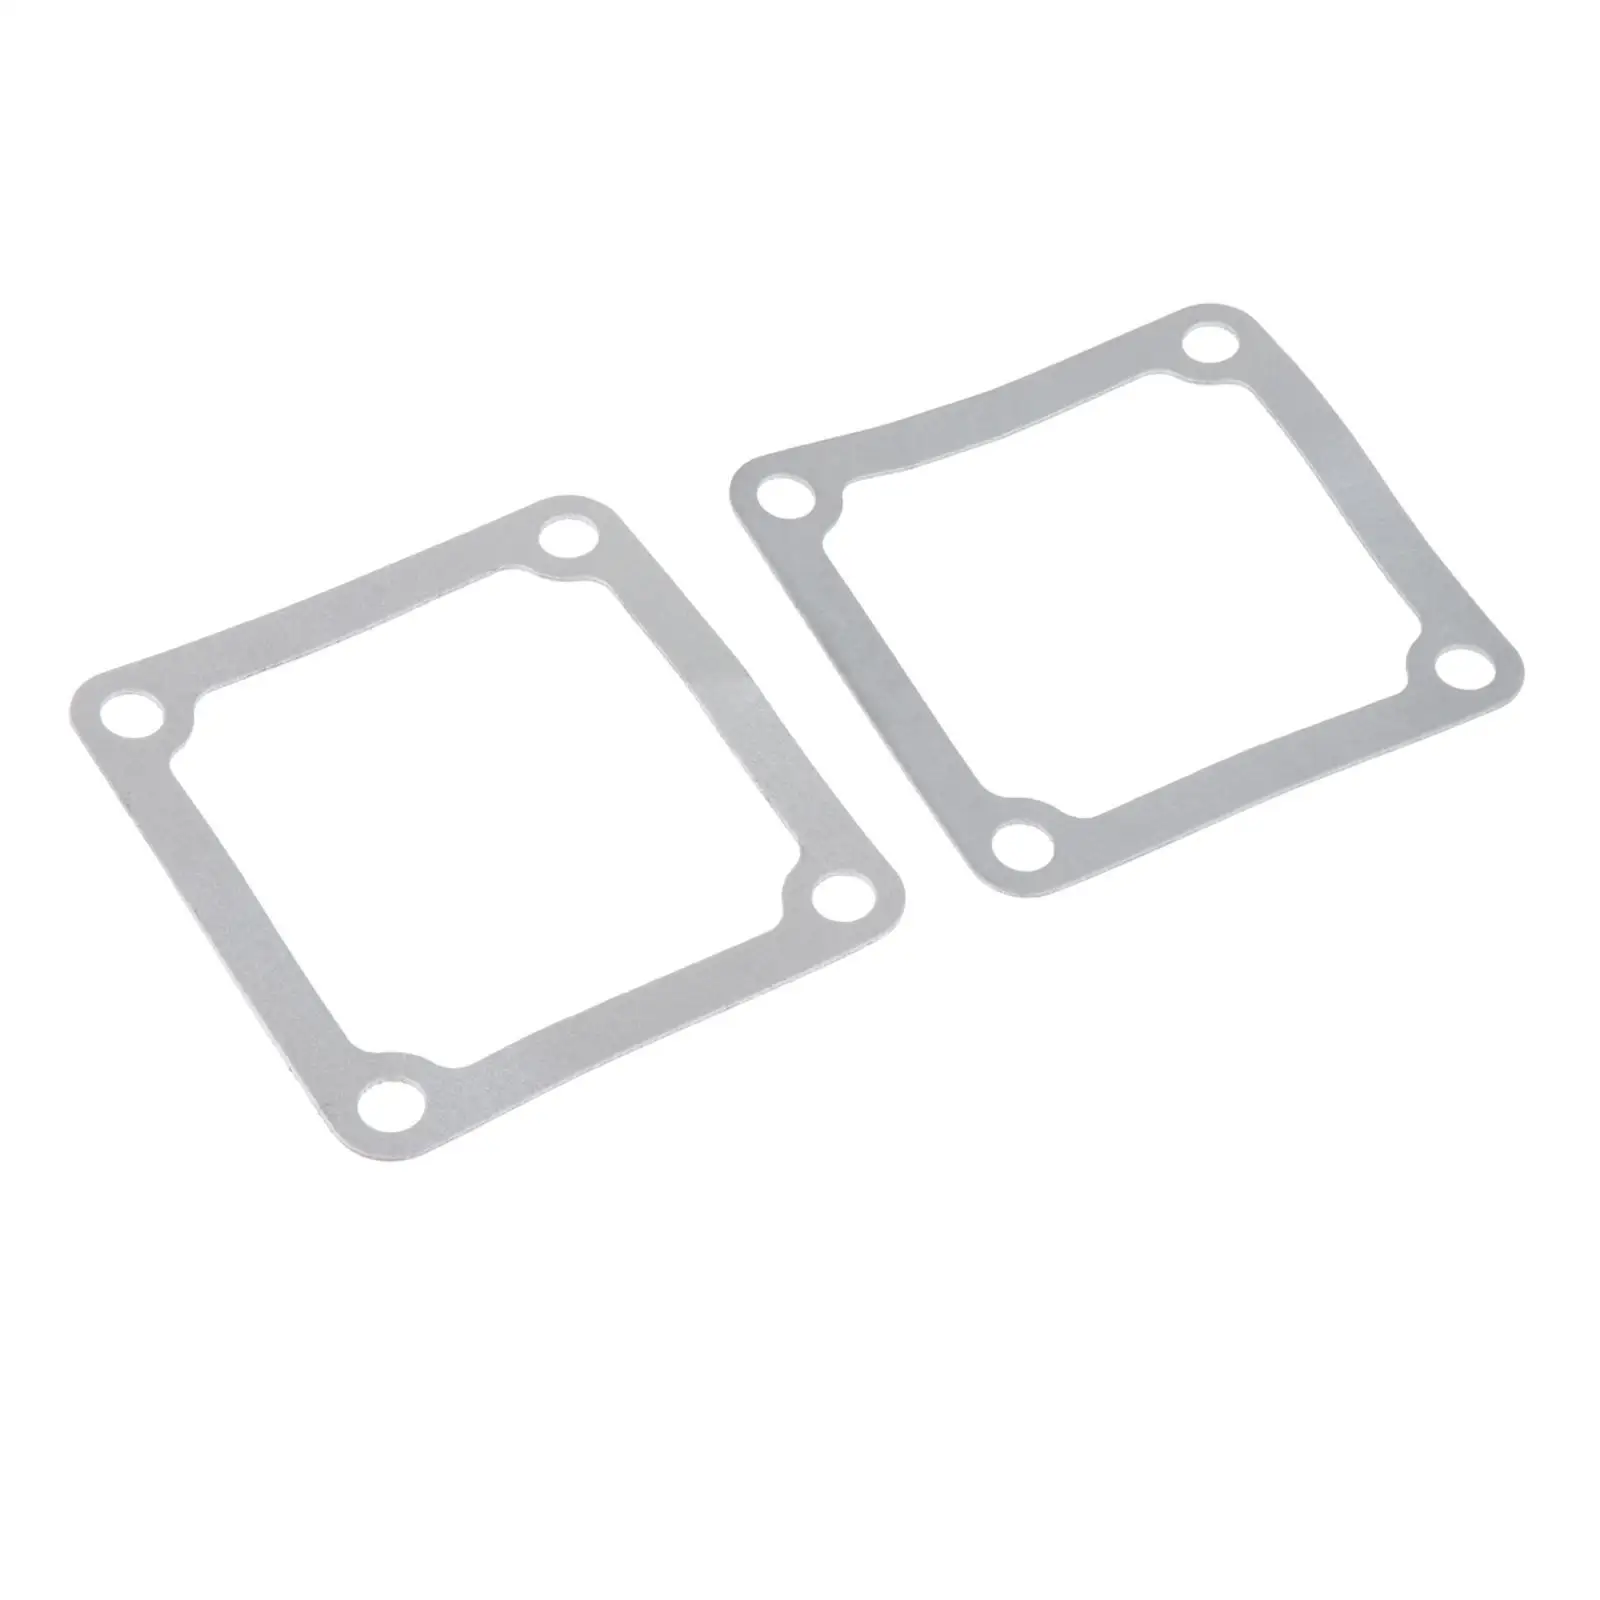 2x Intake Heater Grid Gaskets Easy to Install Auto Leakproof Direct Replaces 93x98mm Portable for Auto Parts Paper